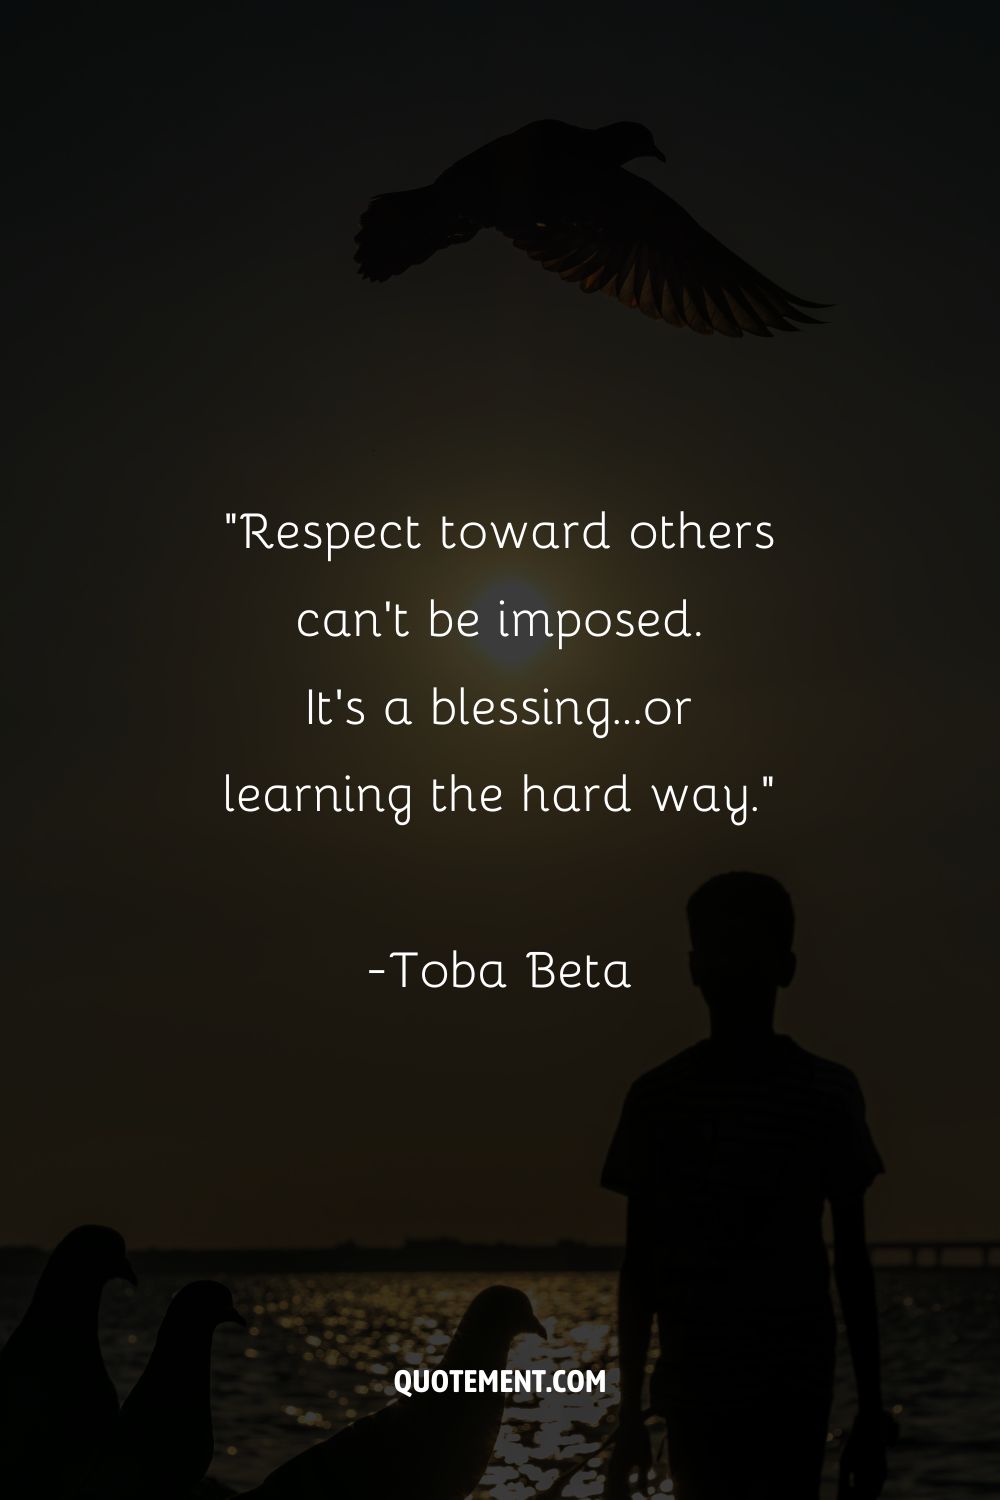 Respect toward others can't be imposed.